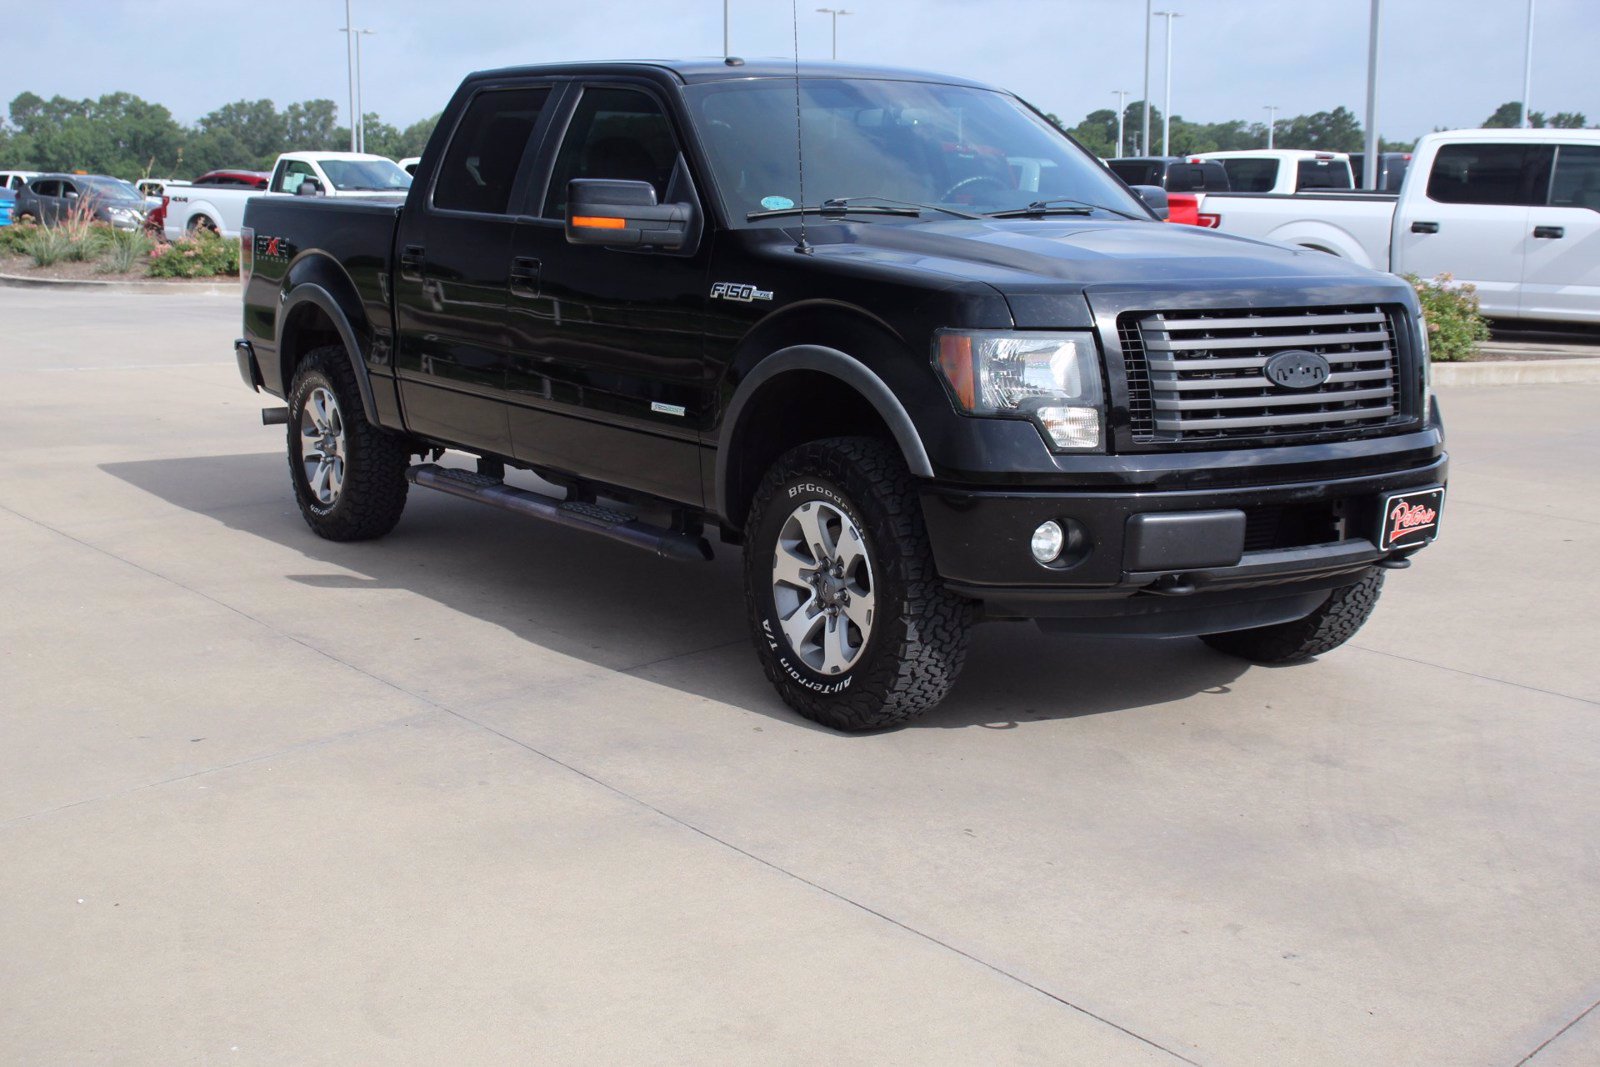 Pre-Owned 2011 Ford F-150 FX4 4D SuperCrew in Longview #9087PA | Peters 2011 Ford F 150 Fx4 5.0 Towing Capacity